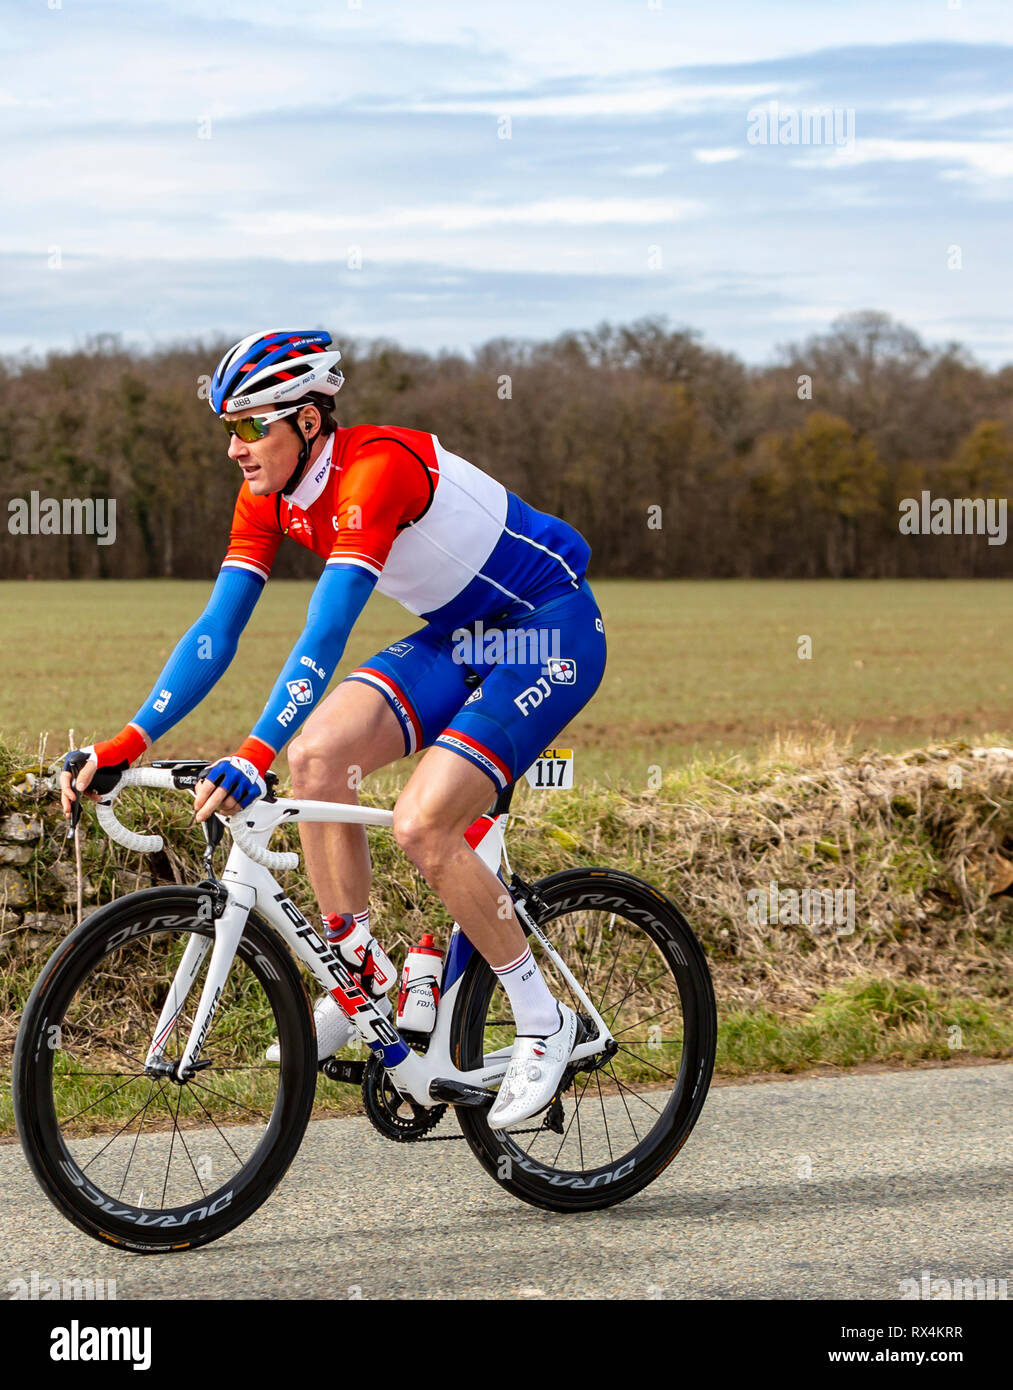 Fains-la-Folie, France - March 5, 2018: The Dutch cyclist Ramon Sinkeldam of Team Groupama-FDJ, riding on a country road during the stage 2 of Paris-N Stock Photo